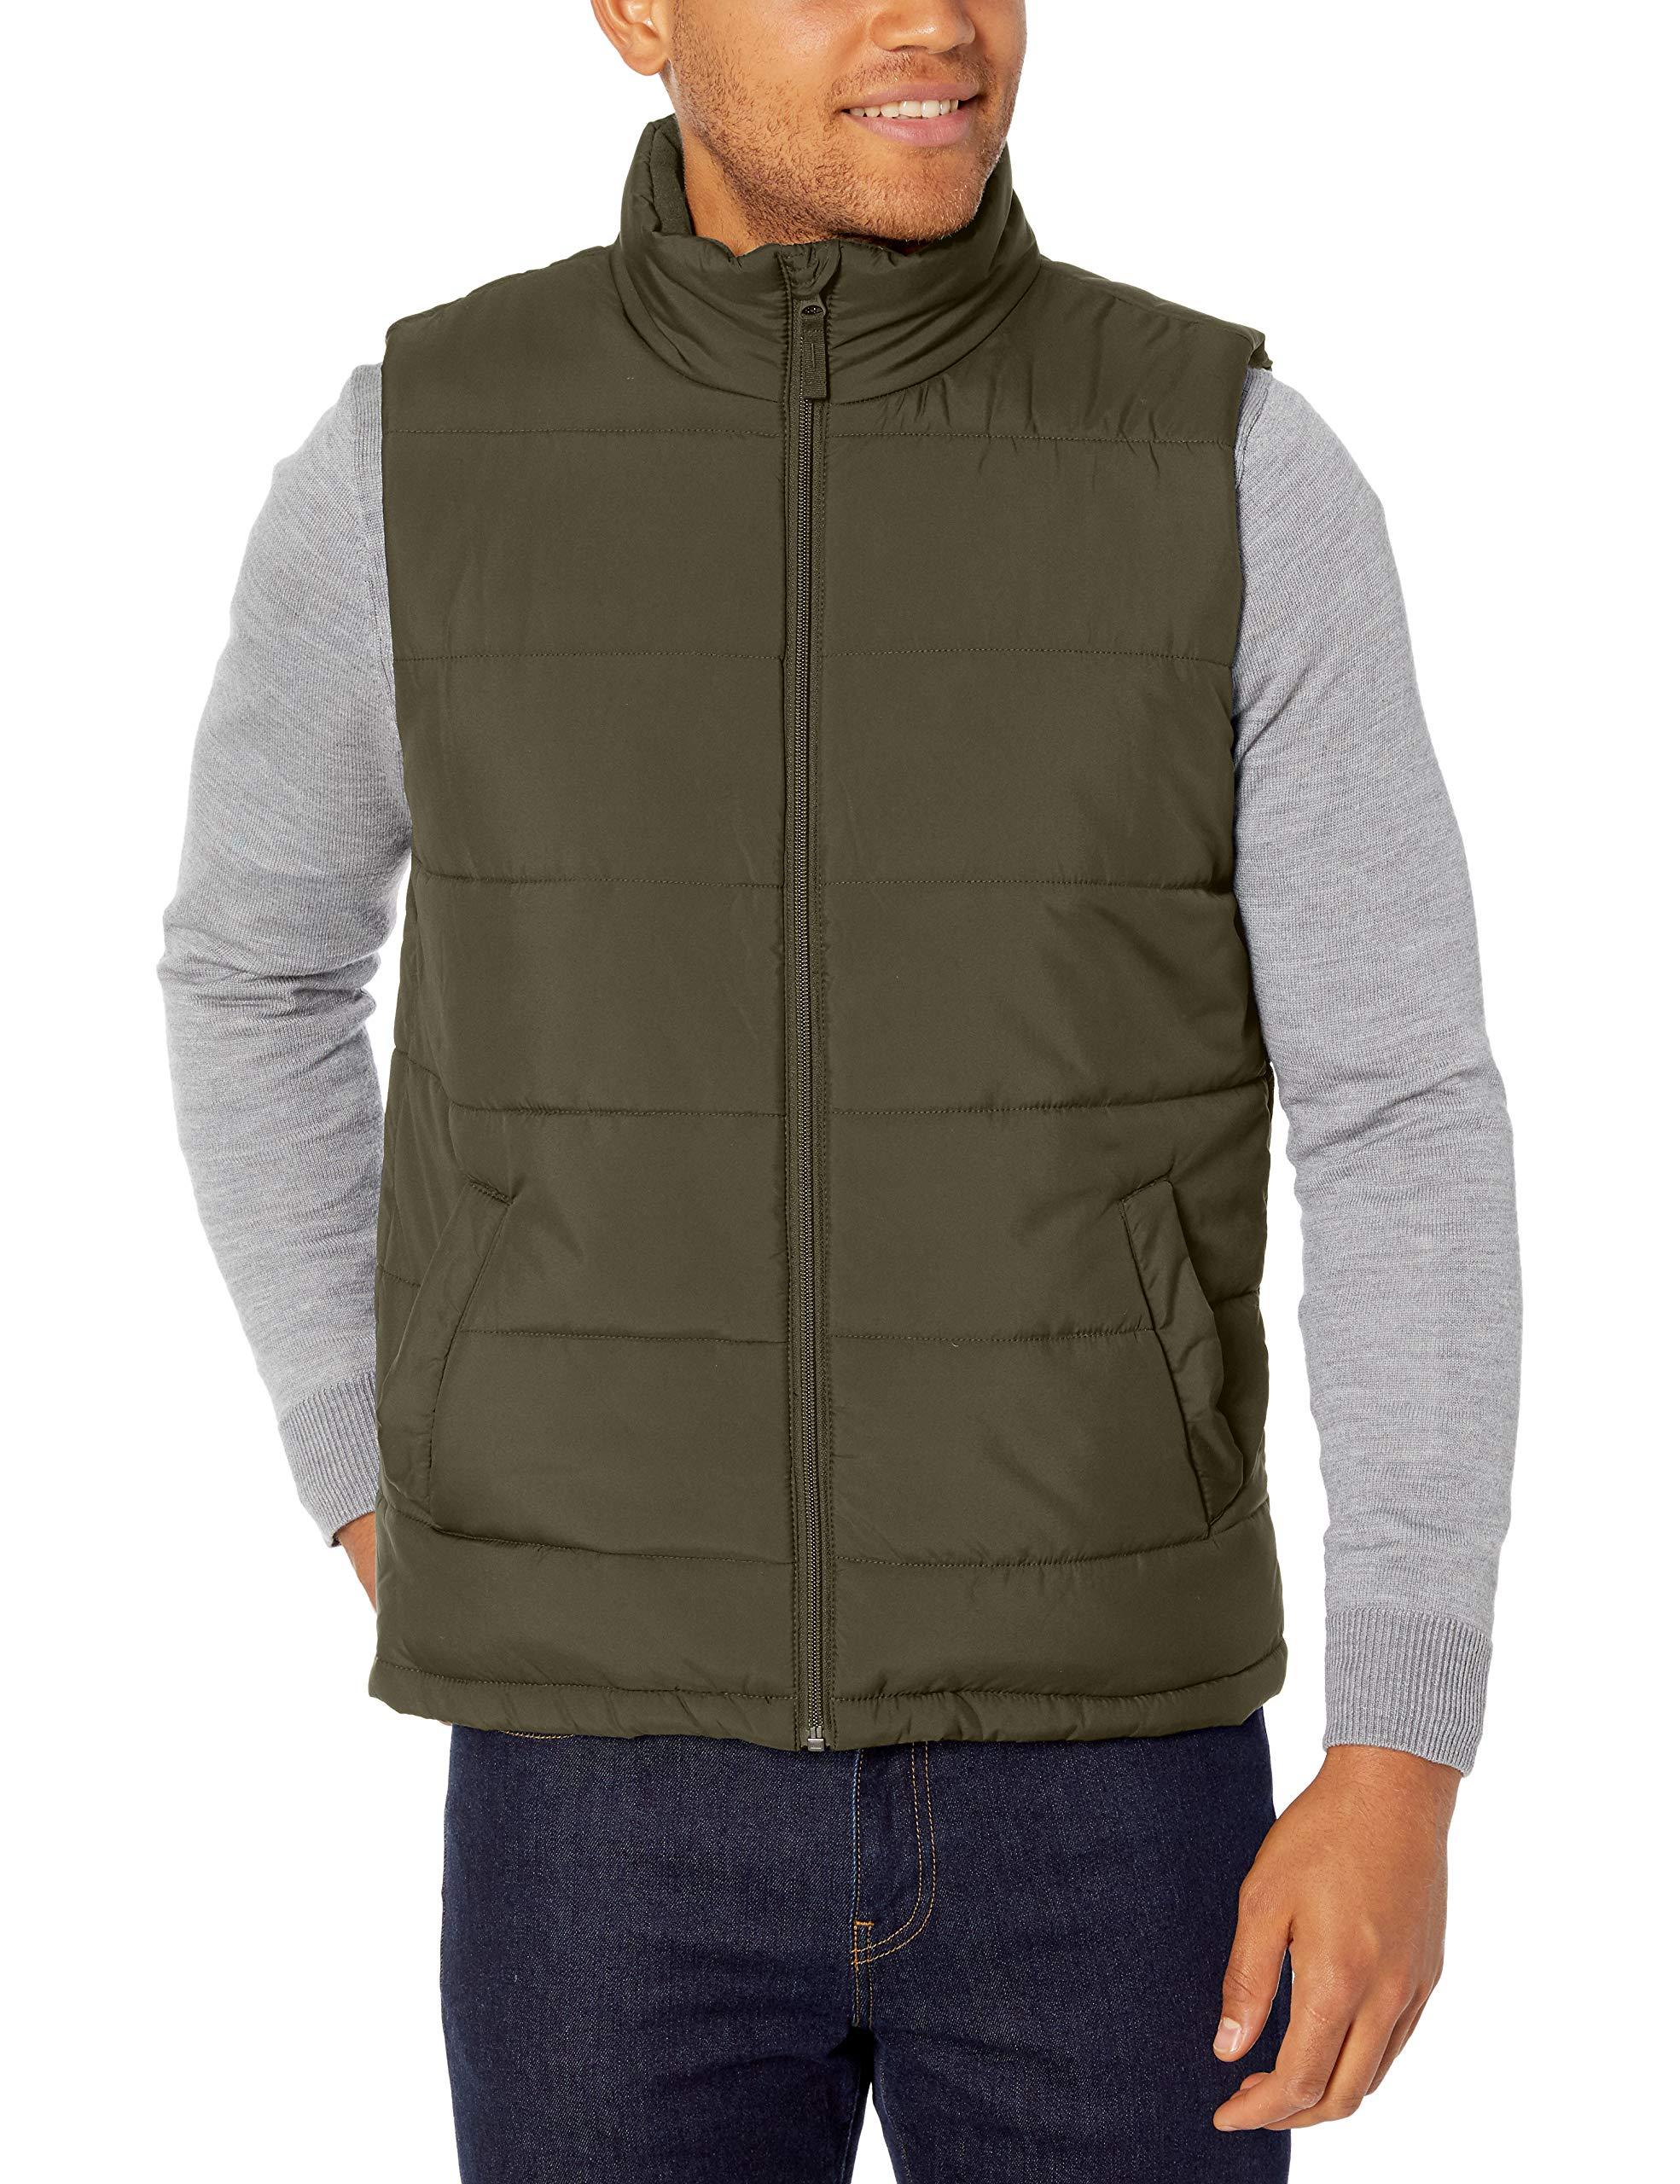 Amazon Essentials Mid-weight Puffer Vest in Olive (Green) for Men - Lyst